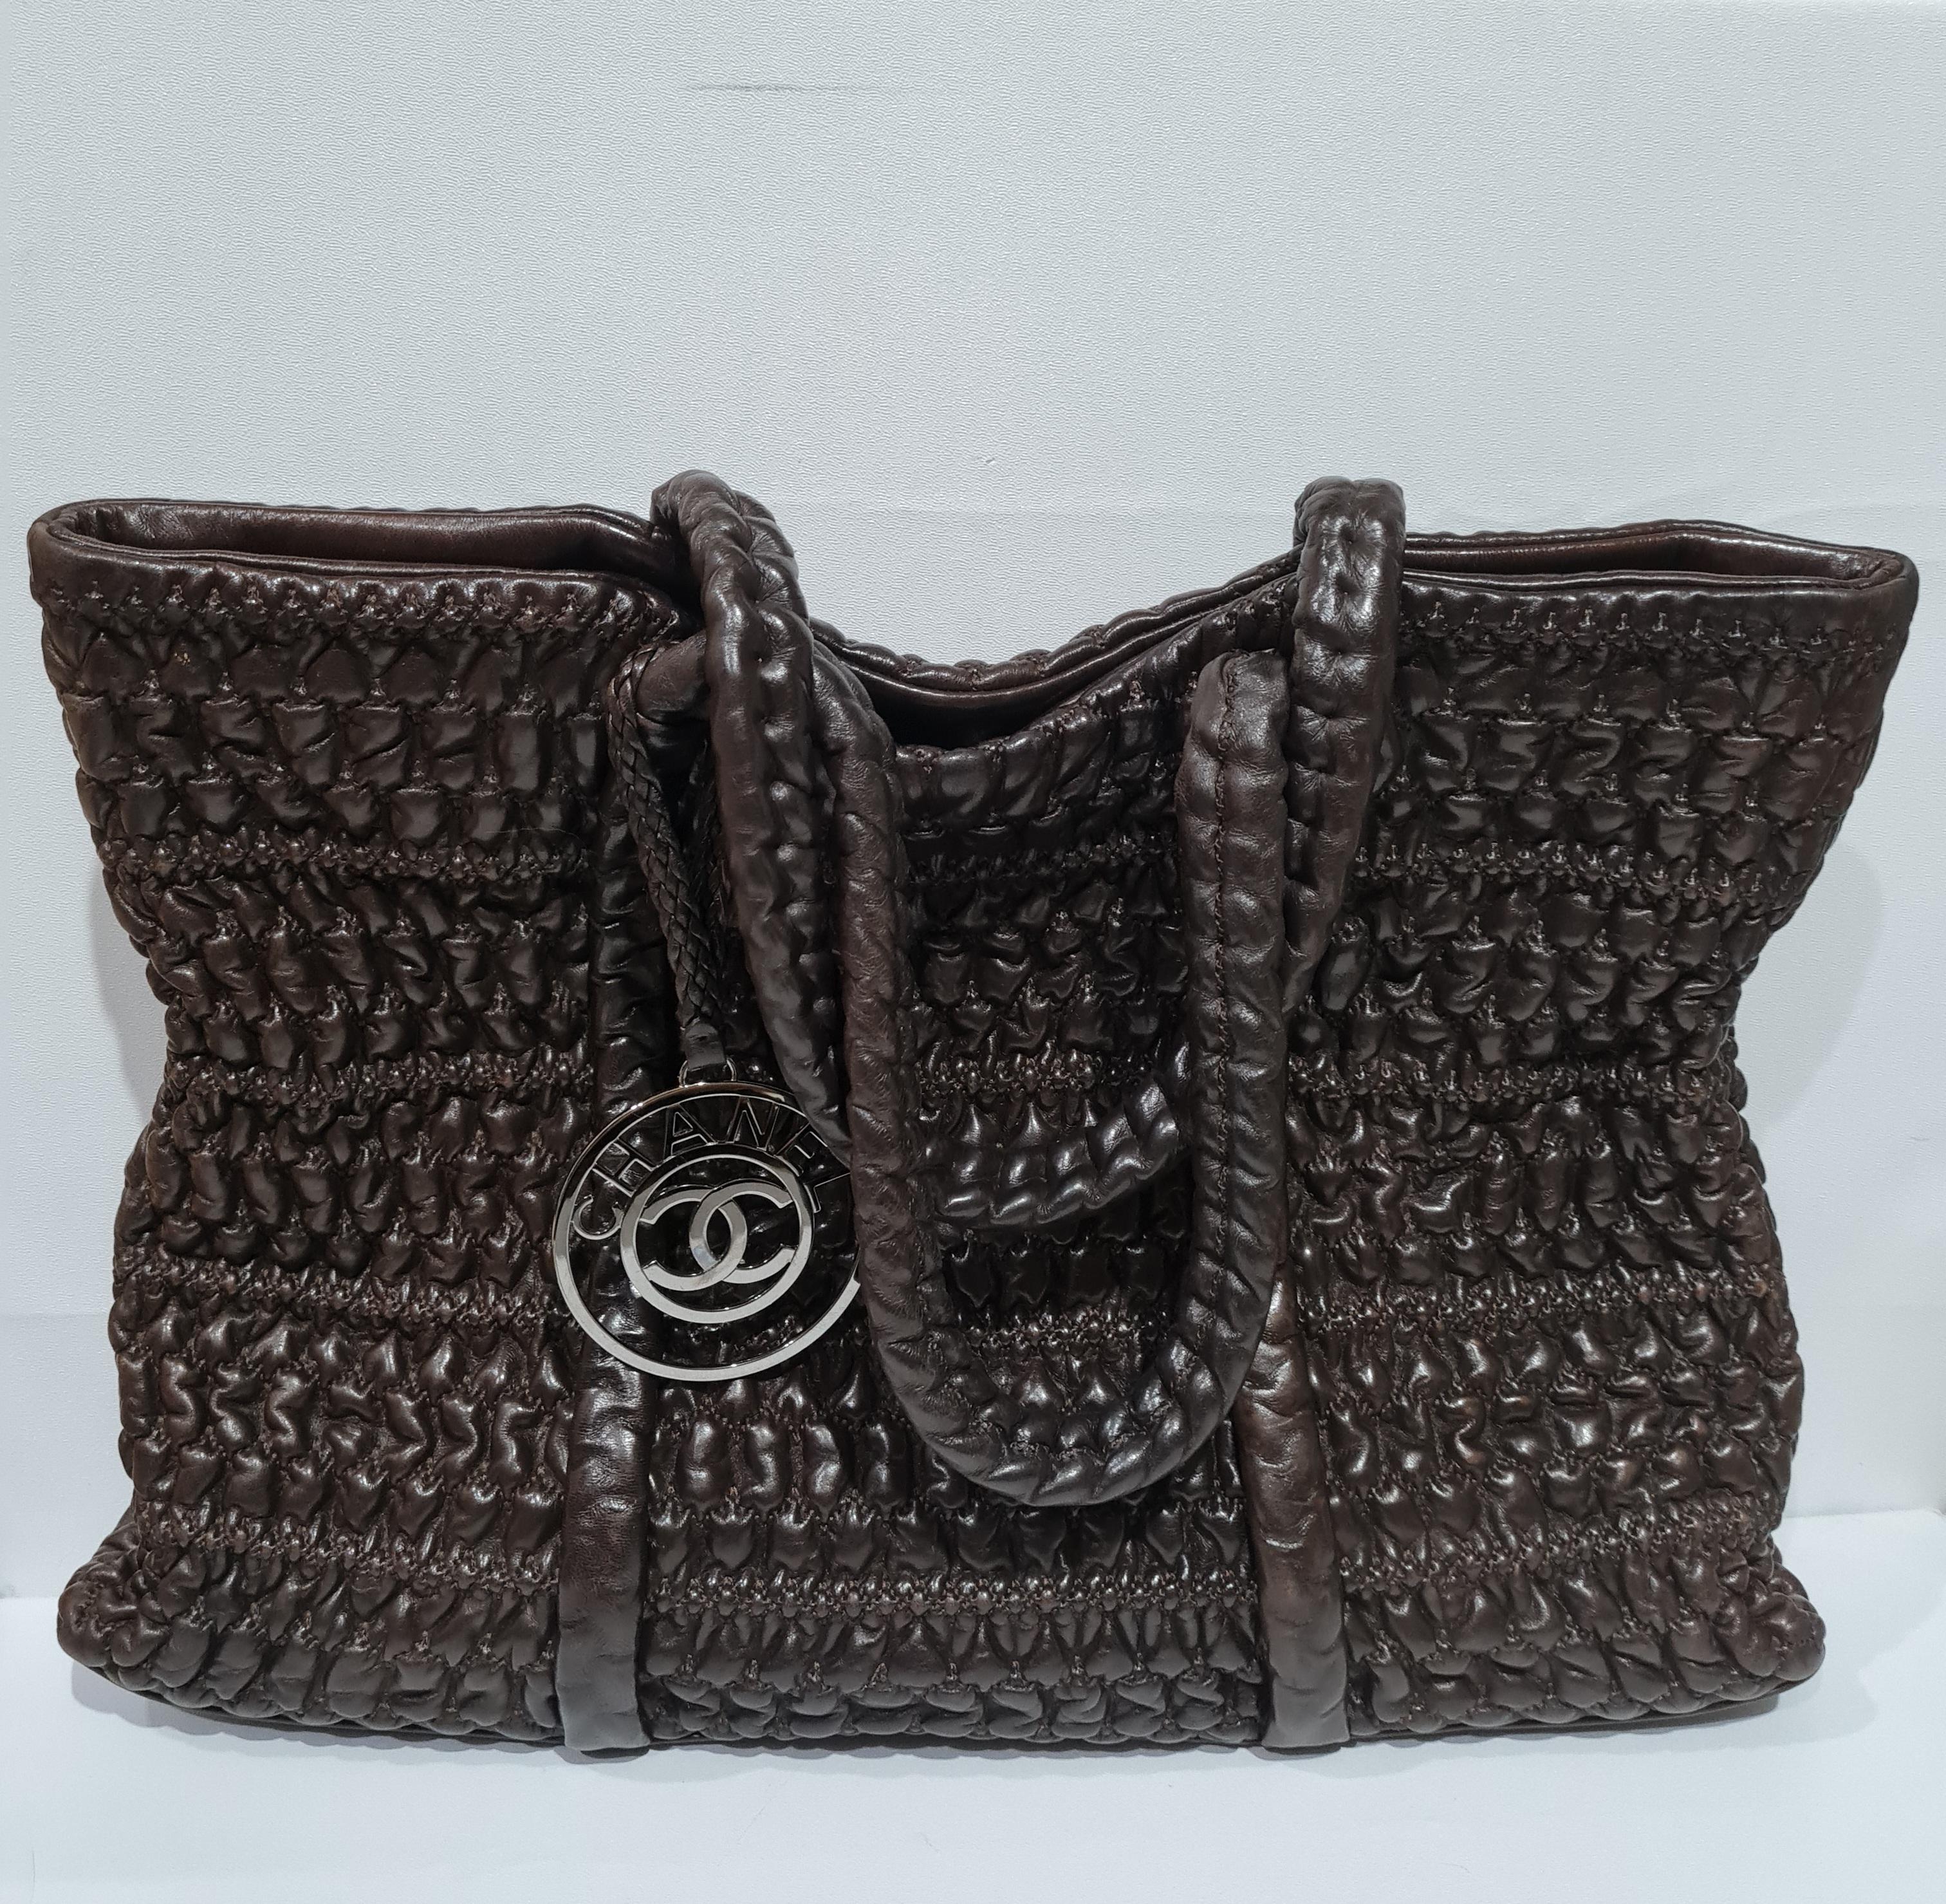 Chanel leather crochet tote bag. Comes in dark brown colour with silver hardware. Overall still in good condition. 

Serial Number: #12564337

Inclusion: Authenticity Card, Dust Bag

